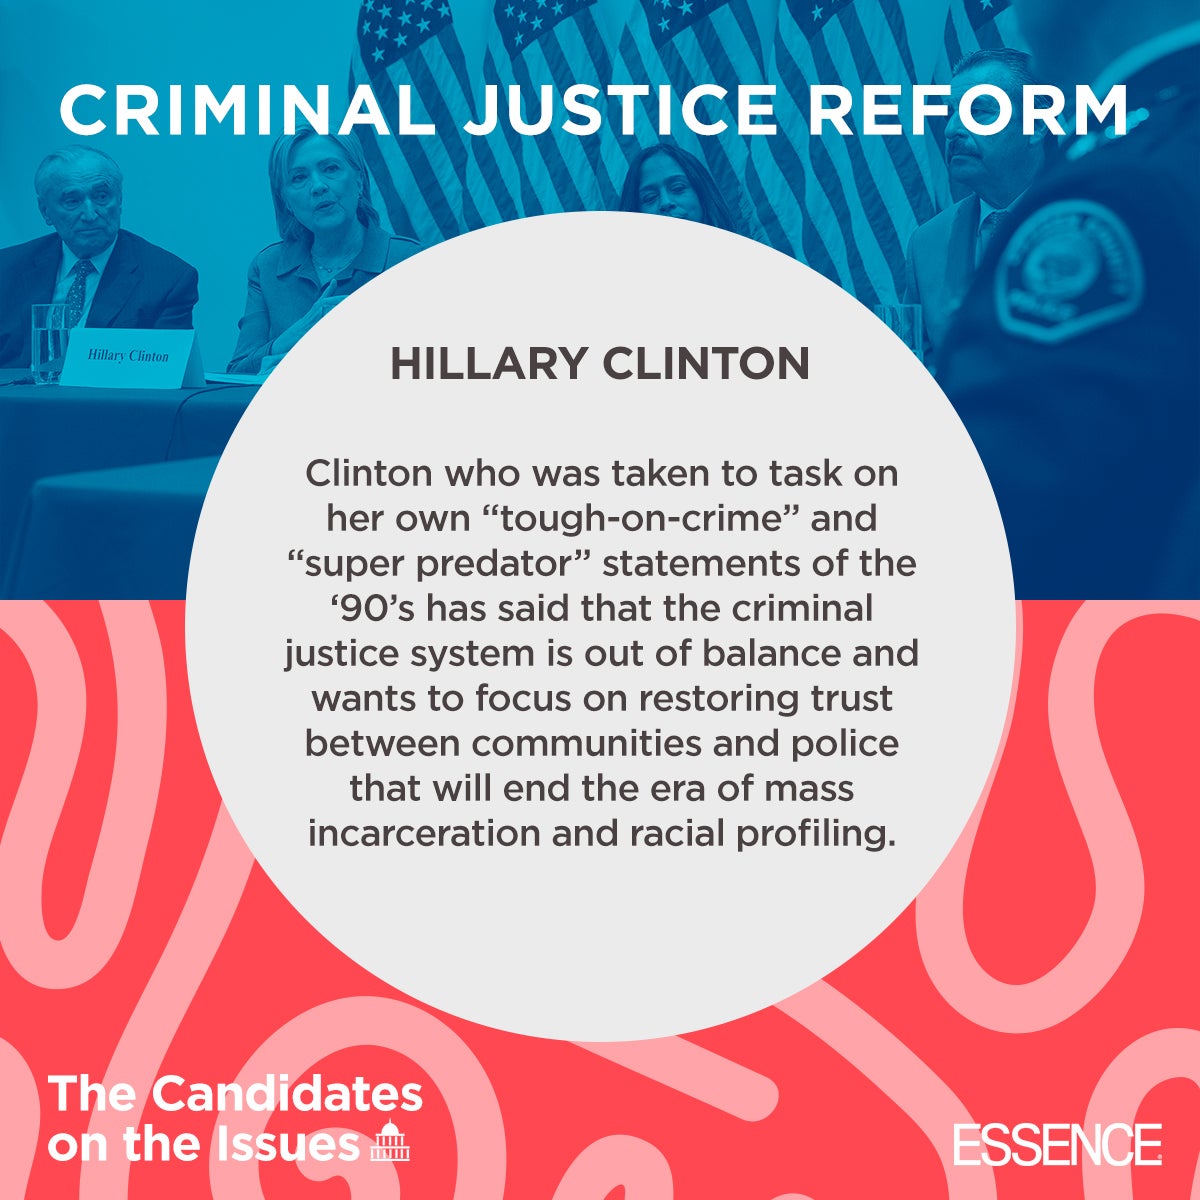 Clinton v. Trump: Here's Where The Presidential Candidates Stand On Important Issues
